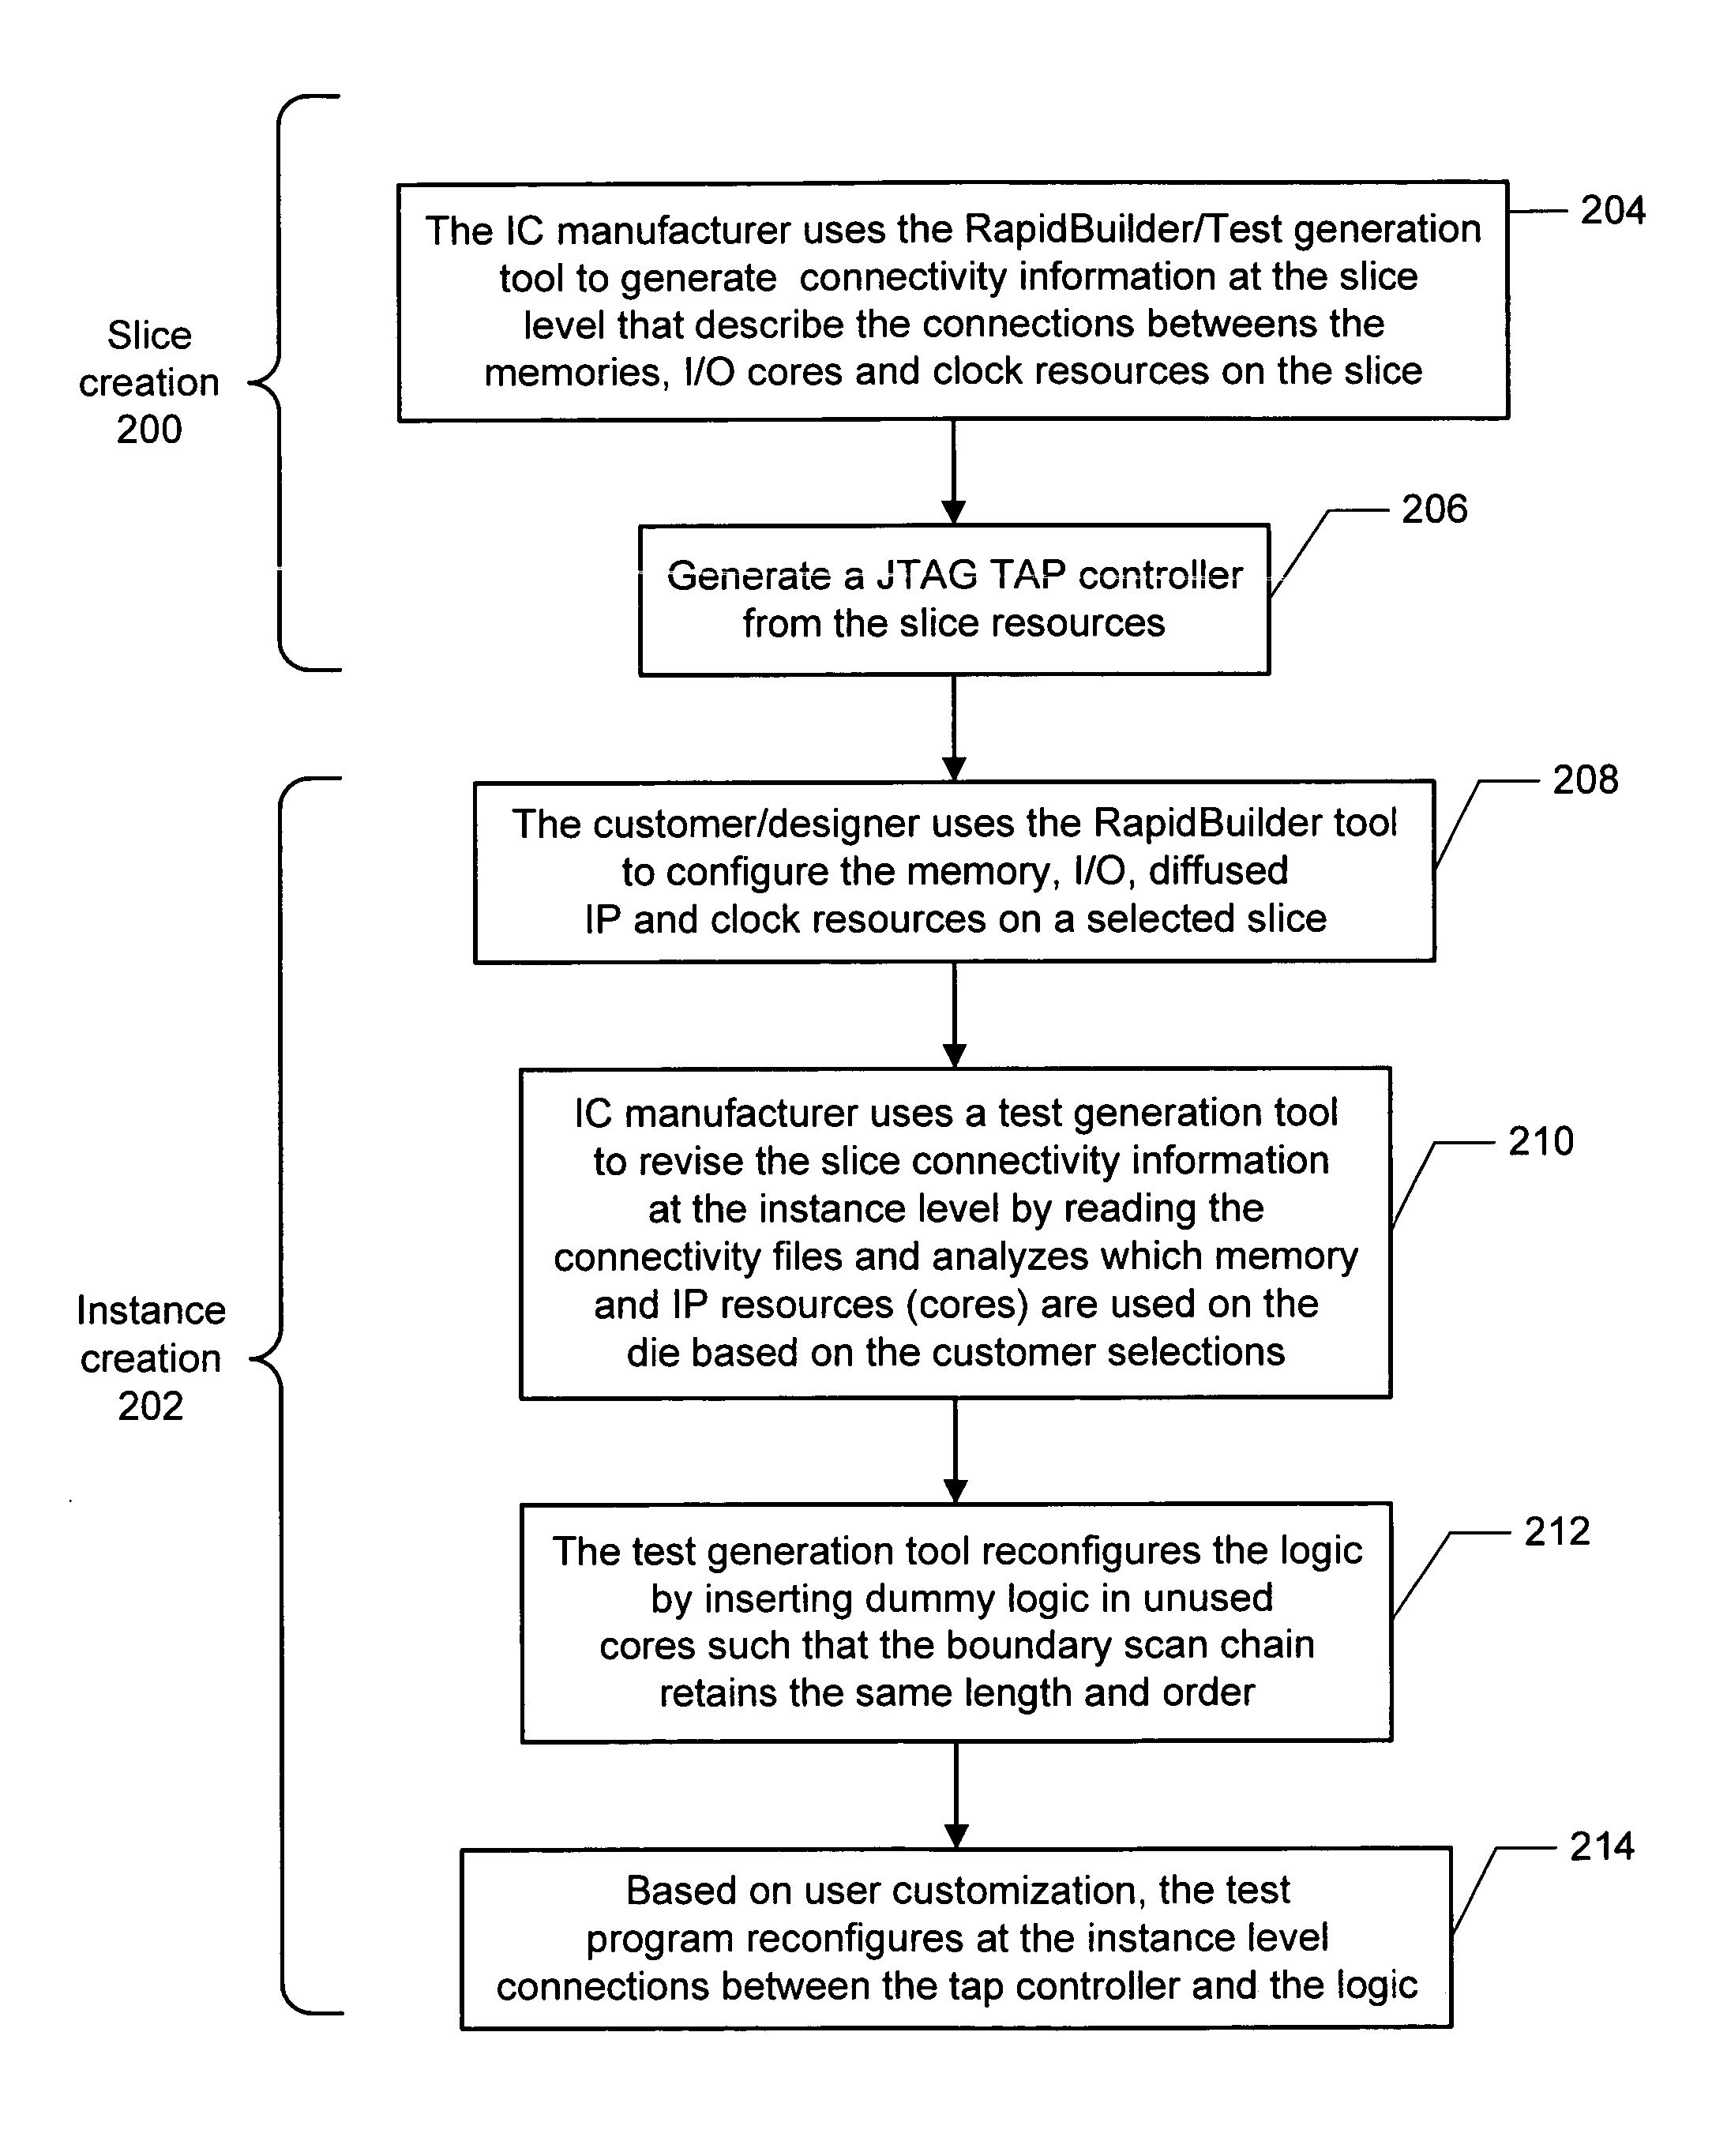 Handling of unused coreware with embedded boundary scan chains to avoid the need of a boundary scan synthesis tool during custom instance creation